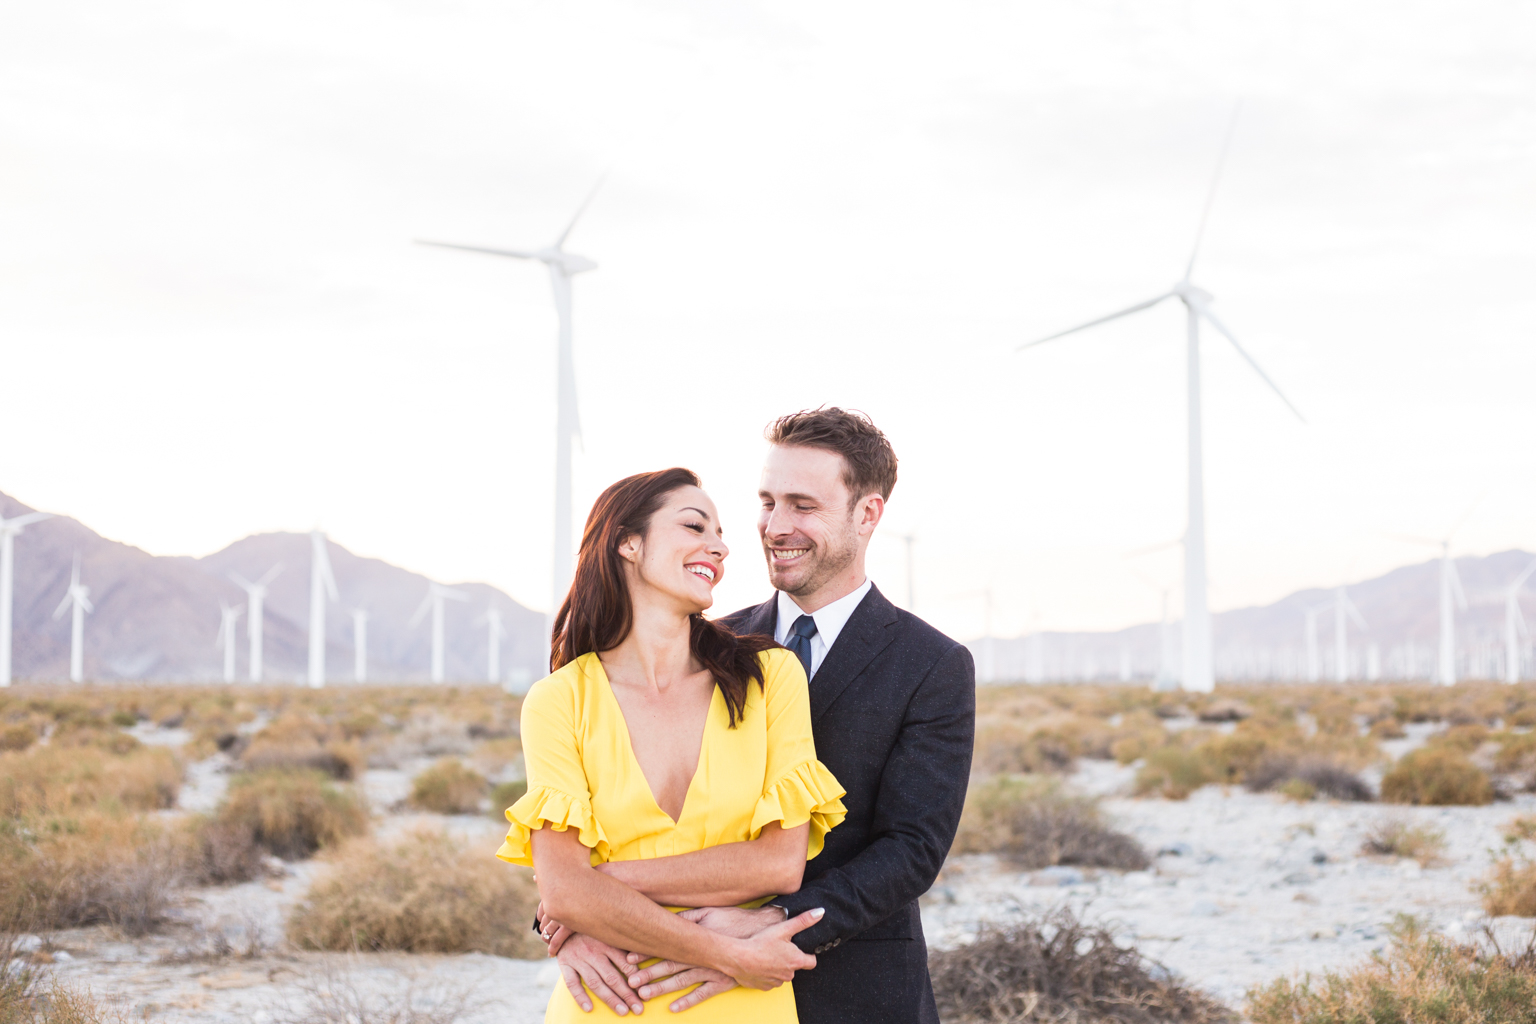 Engagement shoot with Palm Springs Windmills